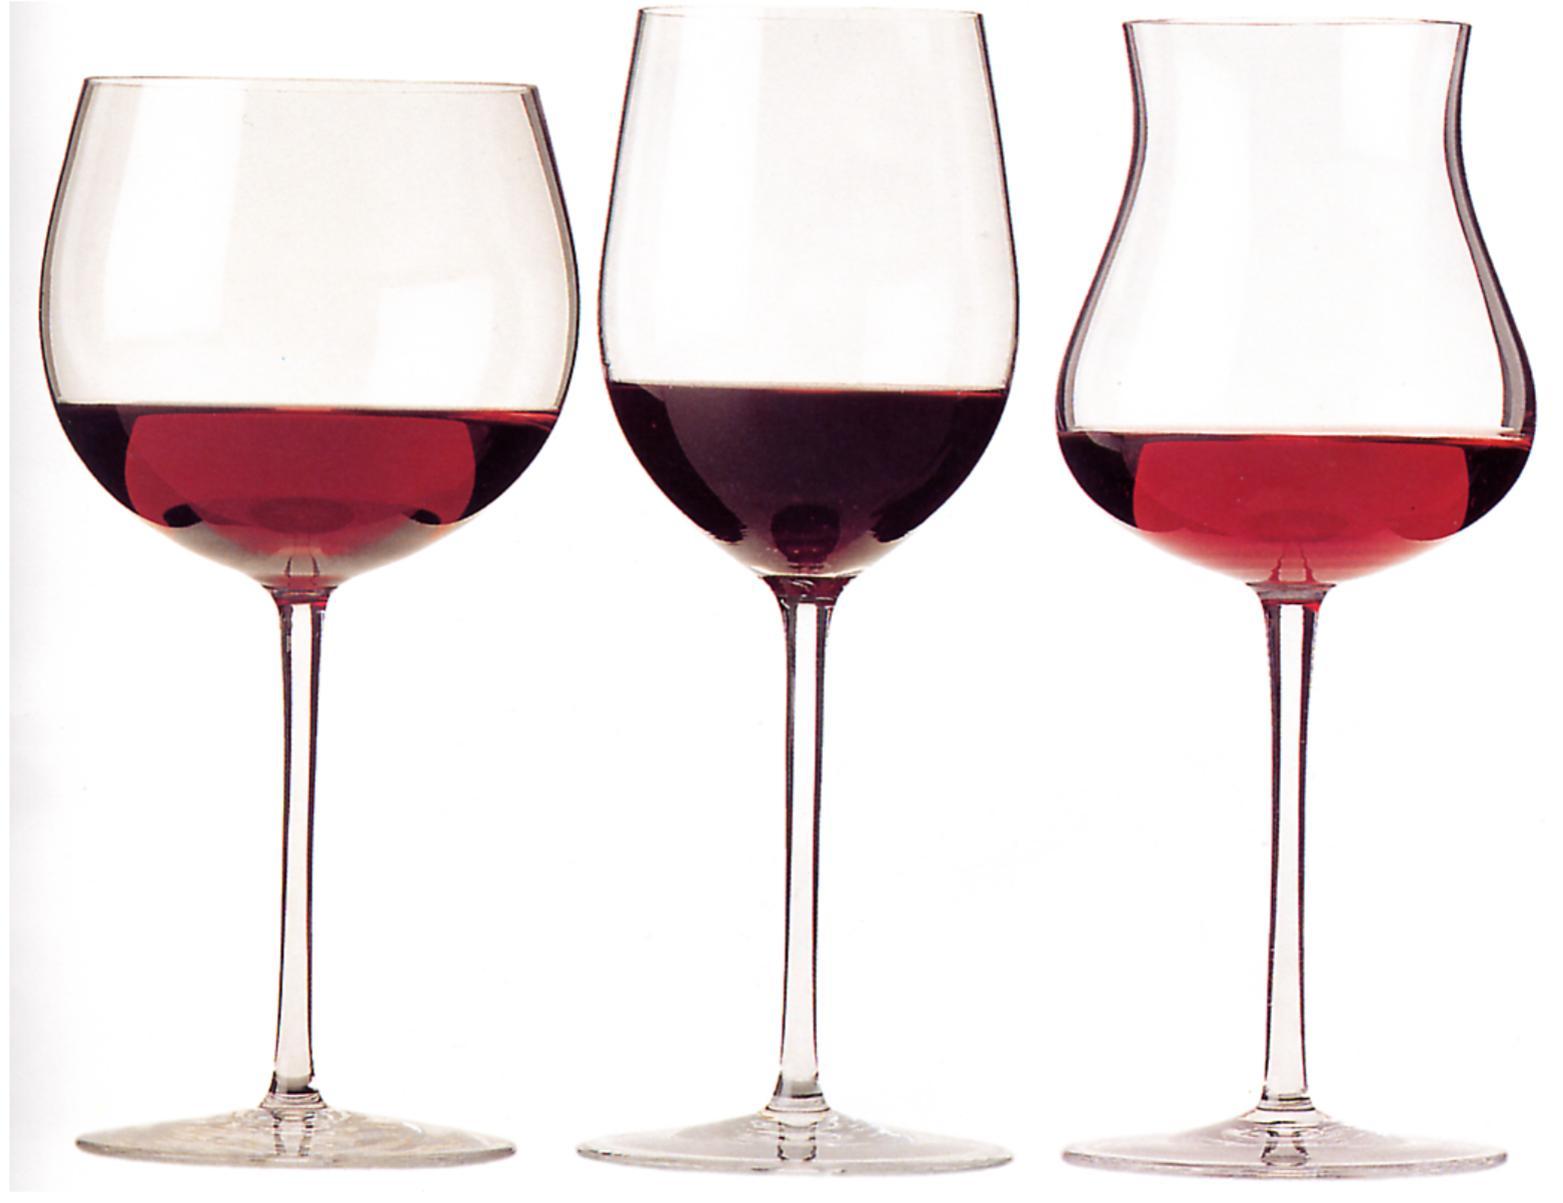 Choosing A Particular Wine Glass For A Type Of Wine Is Important The